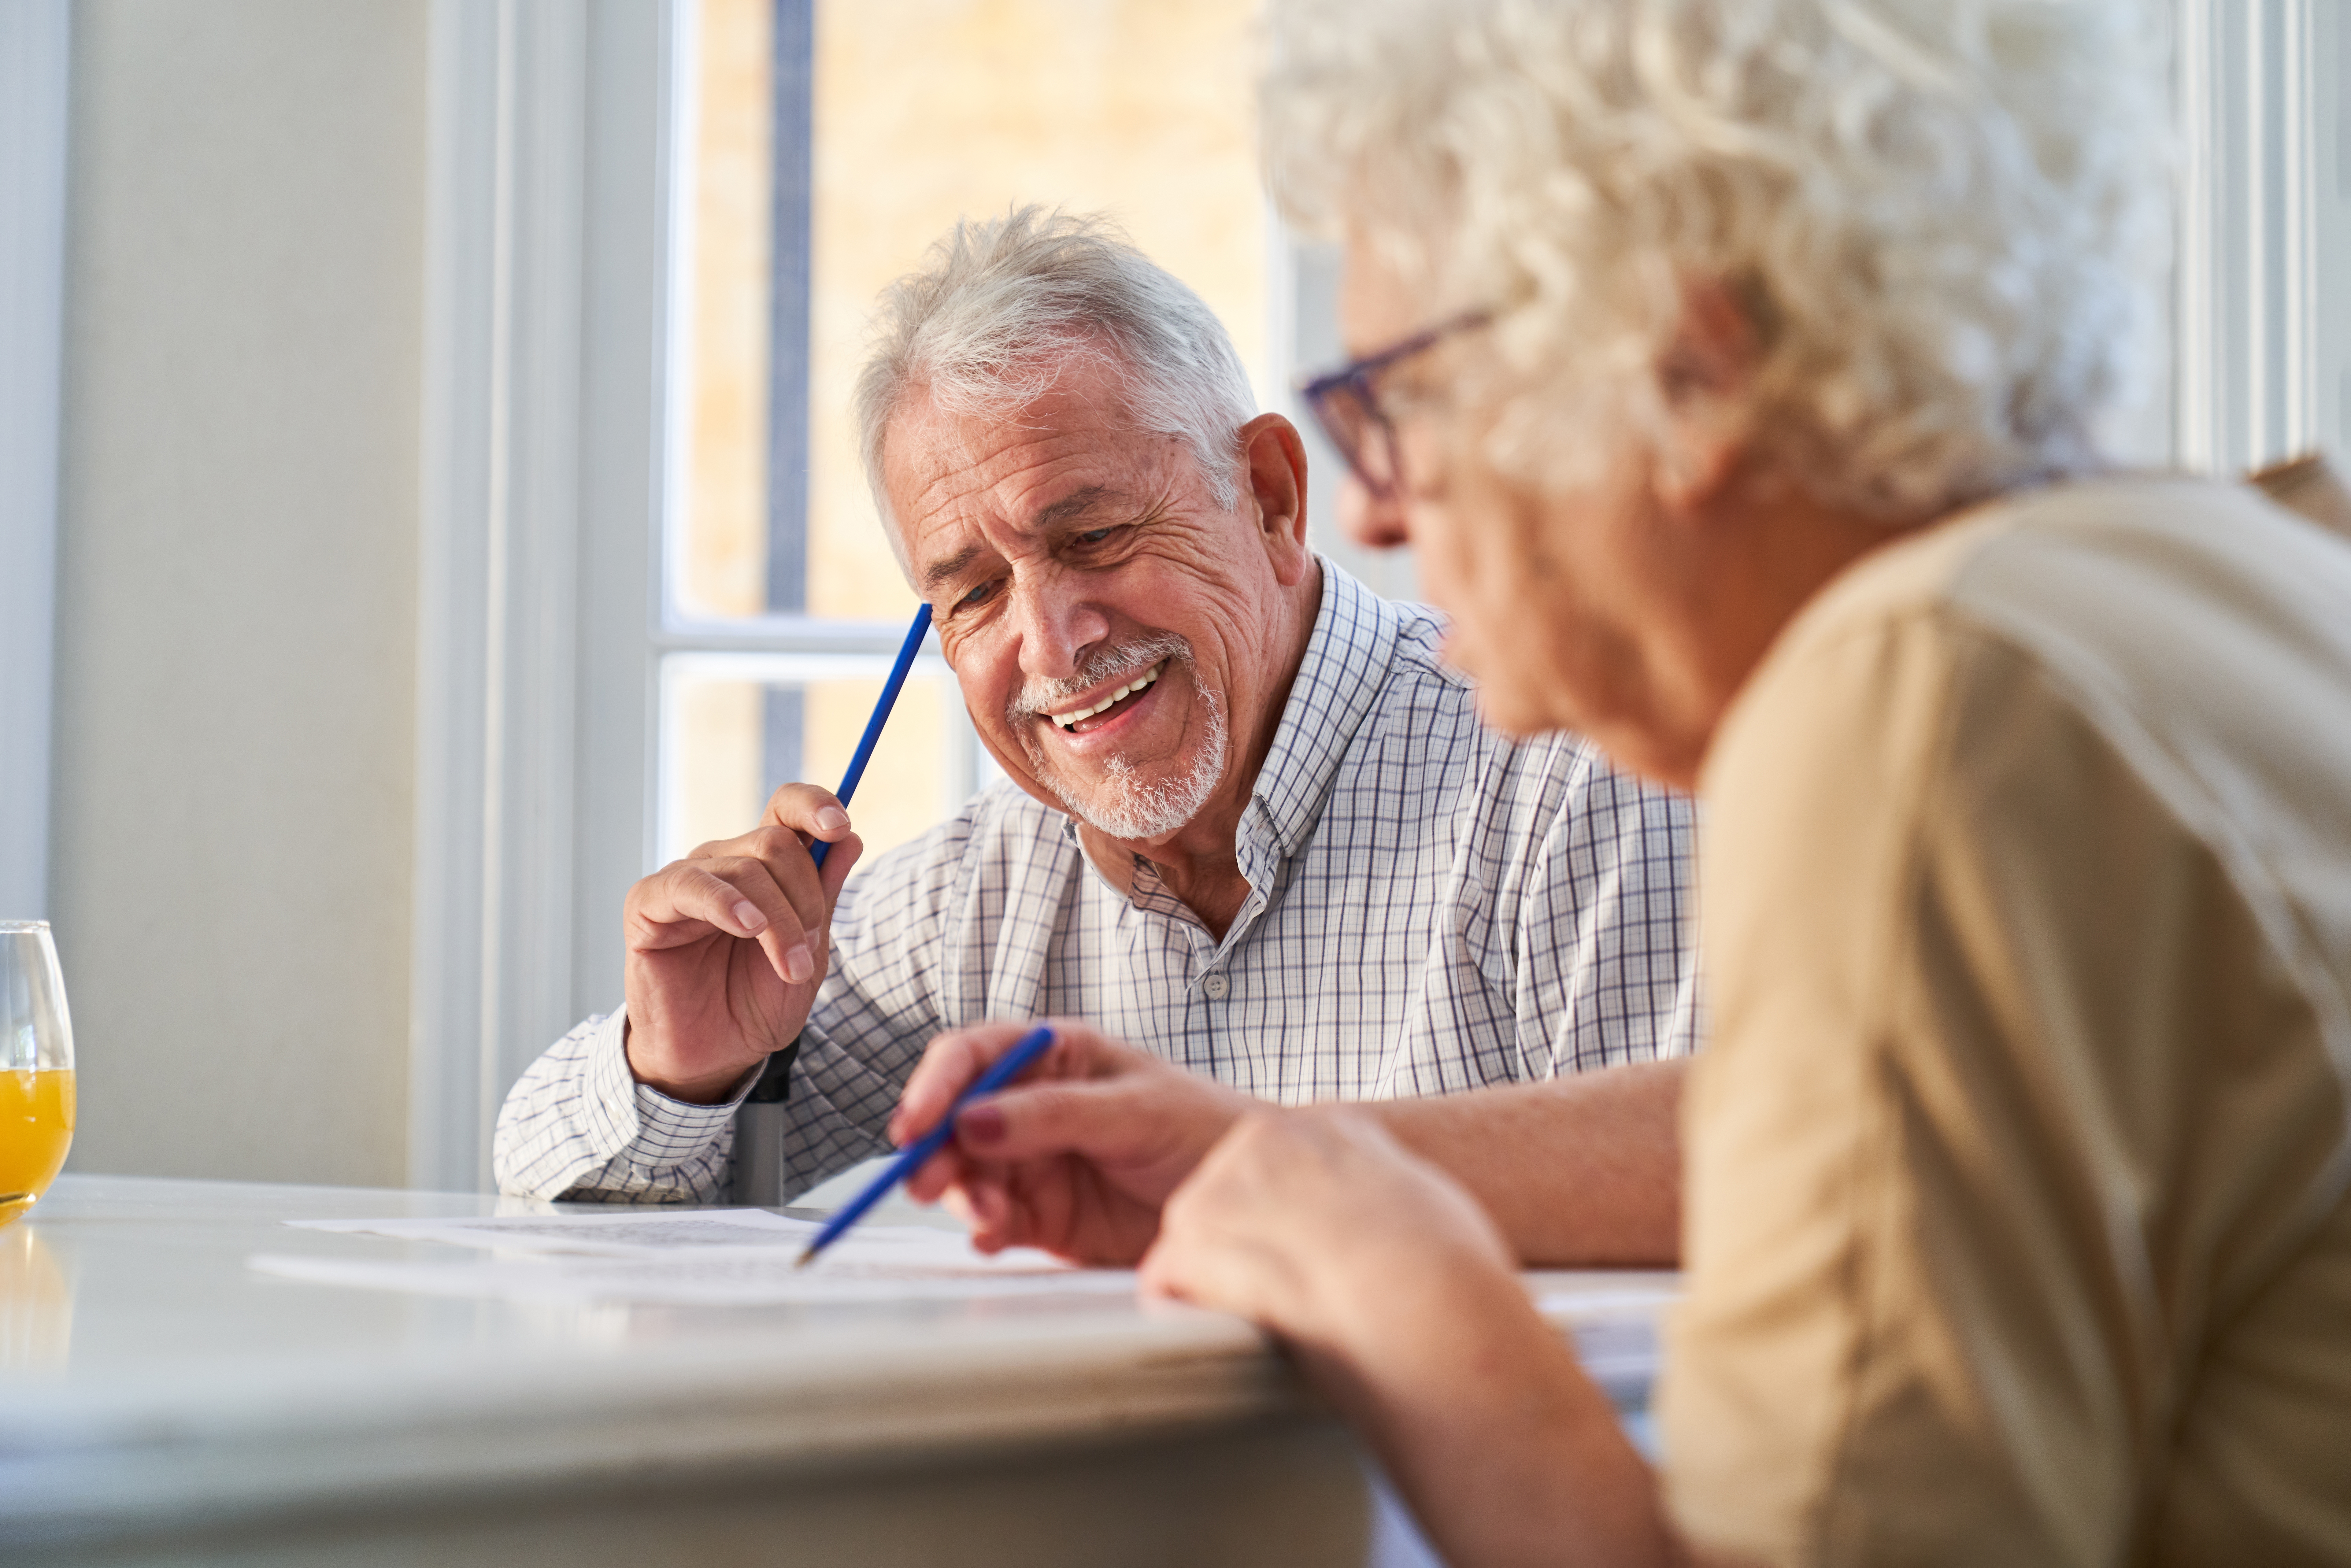 A elderly couple working together on riddles | Source: Shutterstock